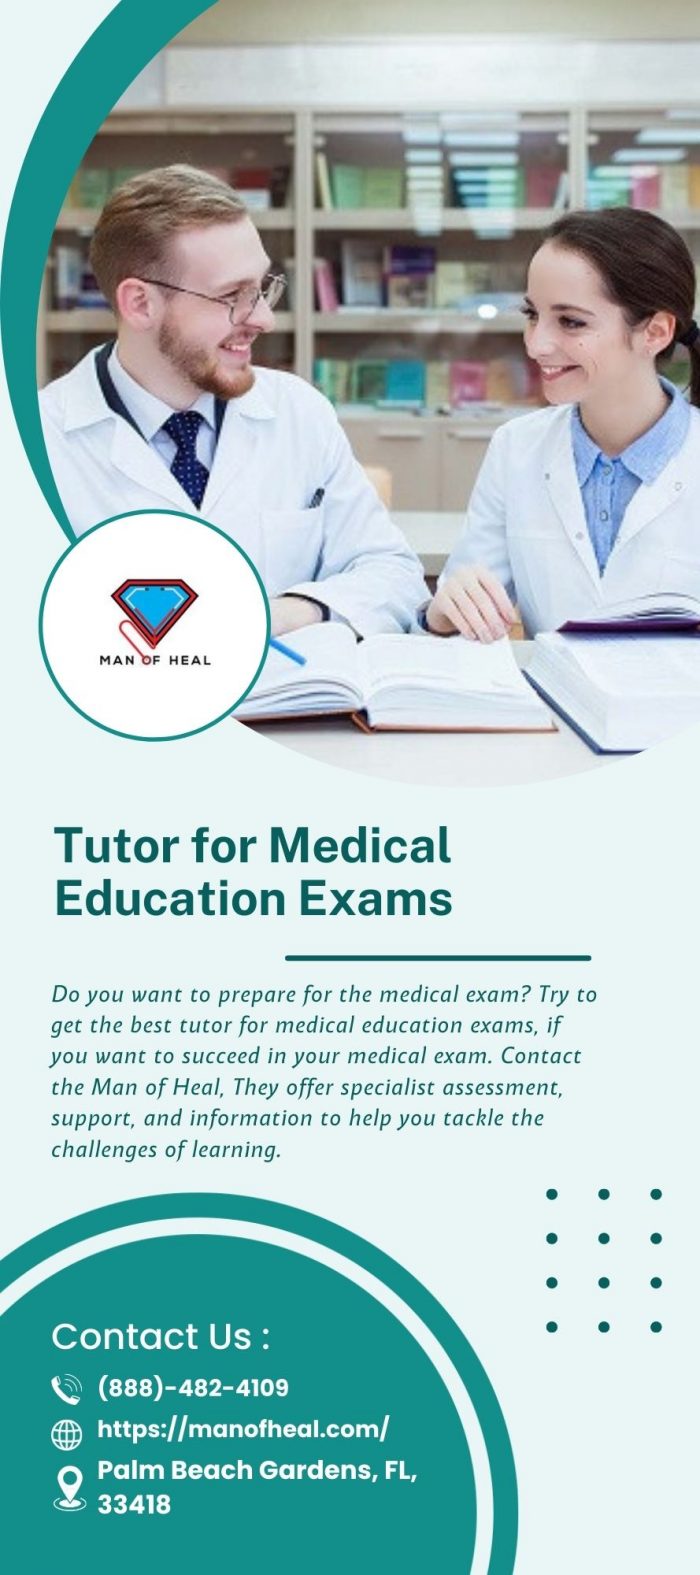 Hire A Top Tutor for Medical Education Exams from Man of Heal